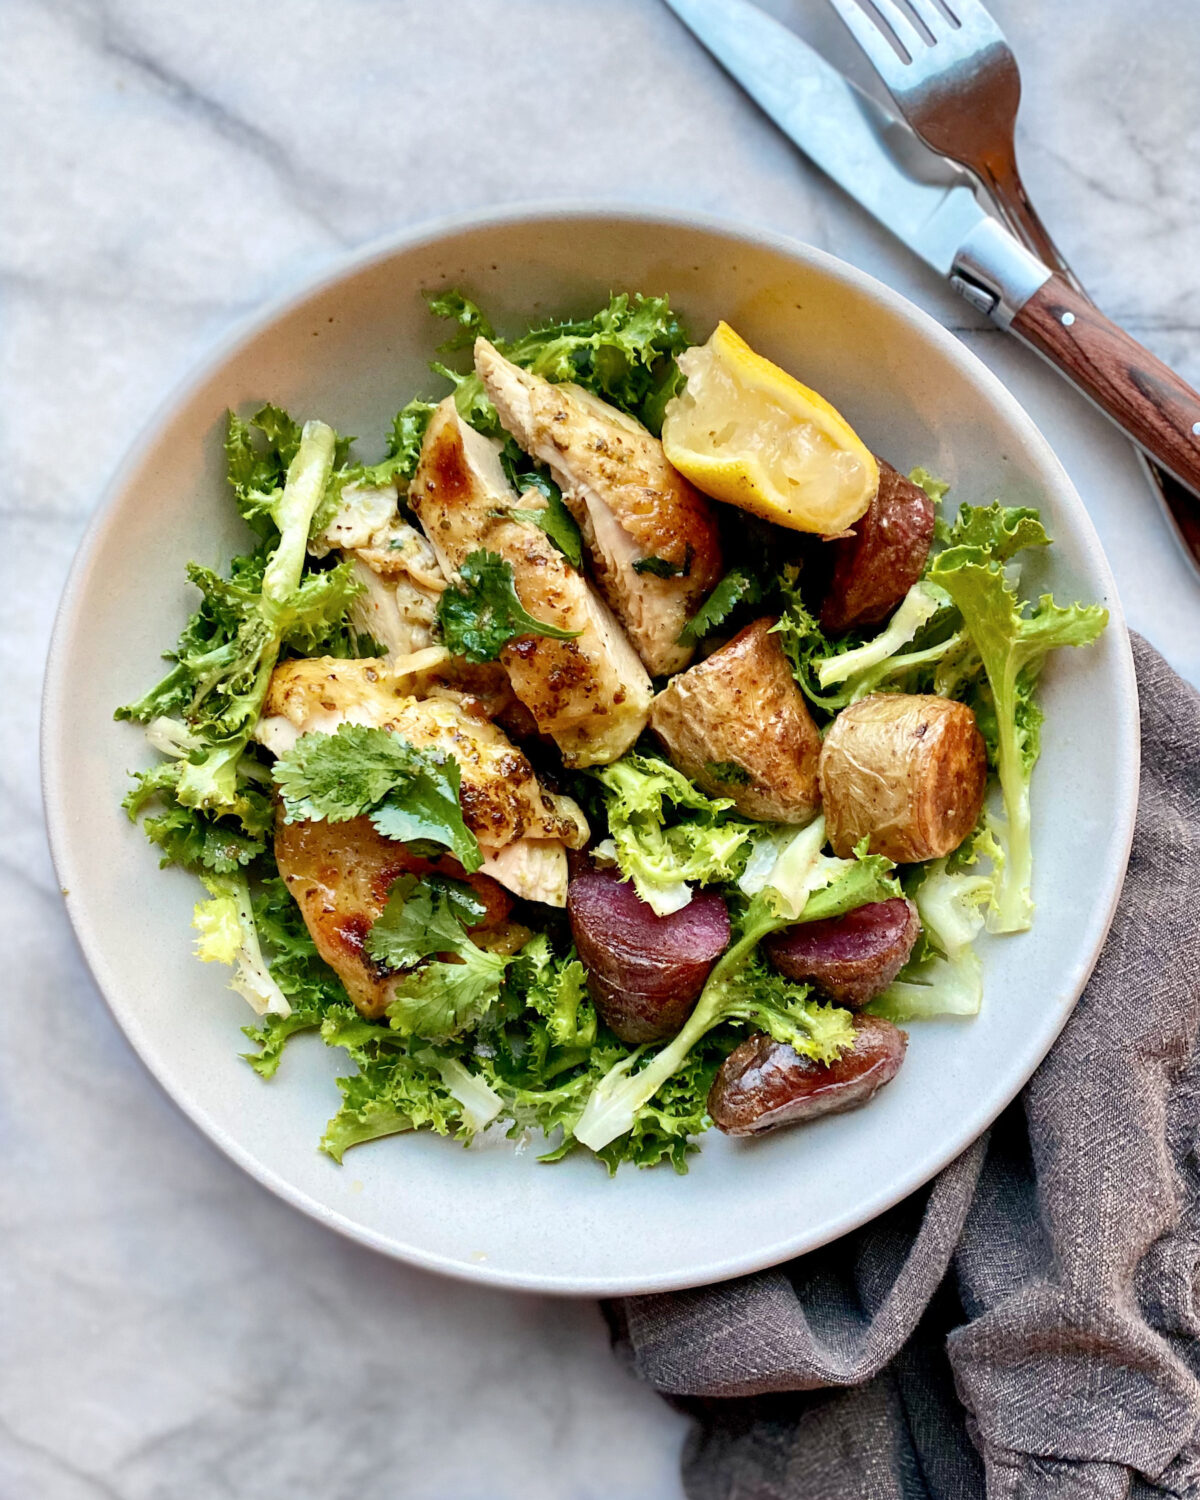 The collected chicken and lemon juices from an easy chicken and potato tray bake become a warm, flavorful dressing for this simple salad. (Lynda Balslev for Tastefood)